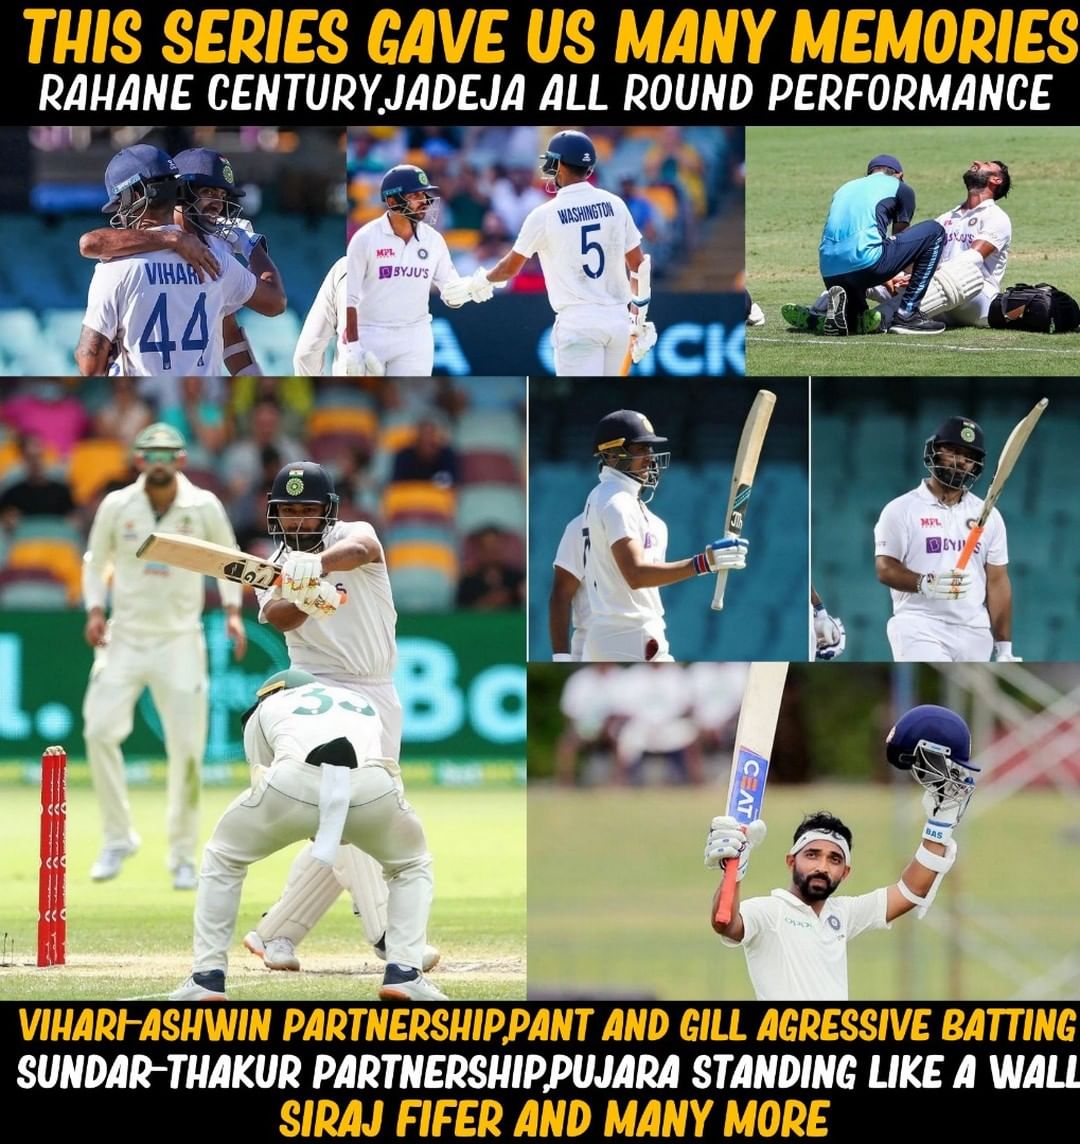 Epic performance by #TeamIndia! Pocketed the Border-Gavaskar Trophy and breached the Aussie fortress, the Gabba after 32 yrs! #AUSvsIND #GabbaTest #INDvsAUS